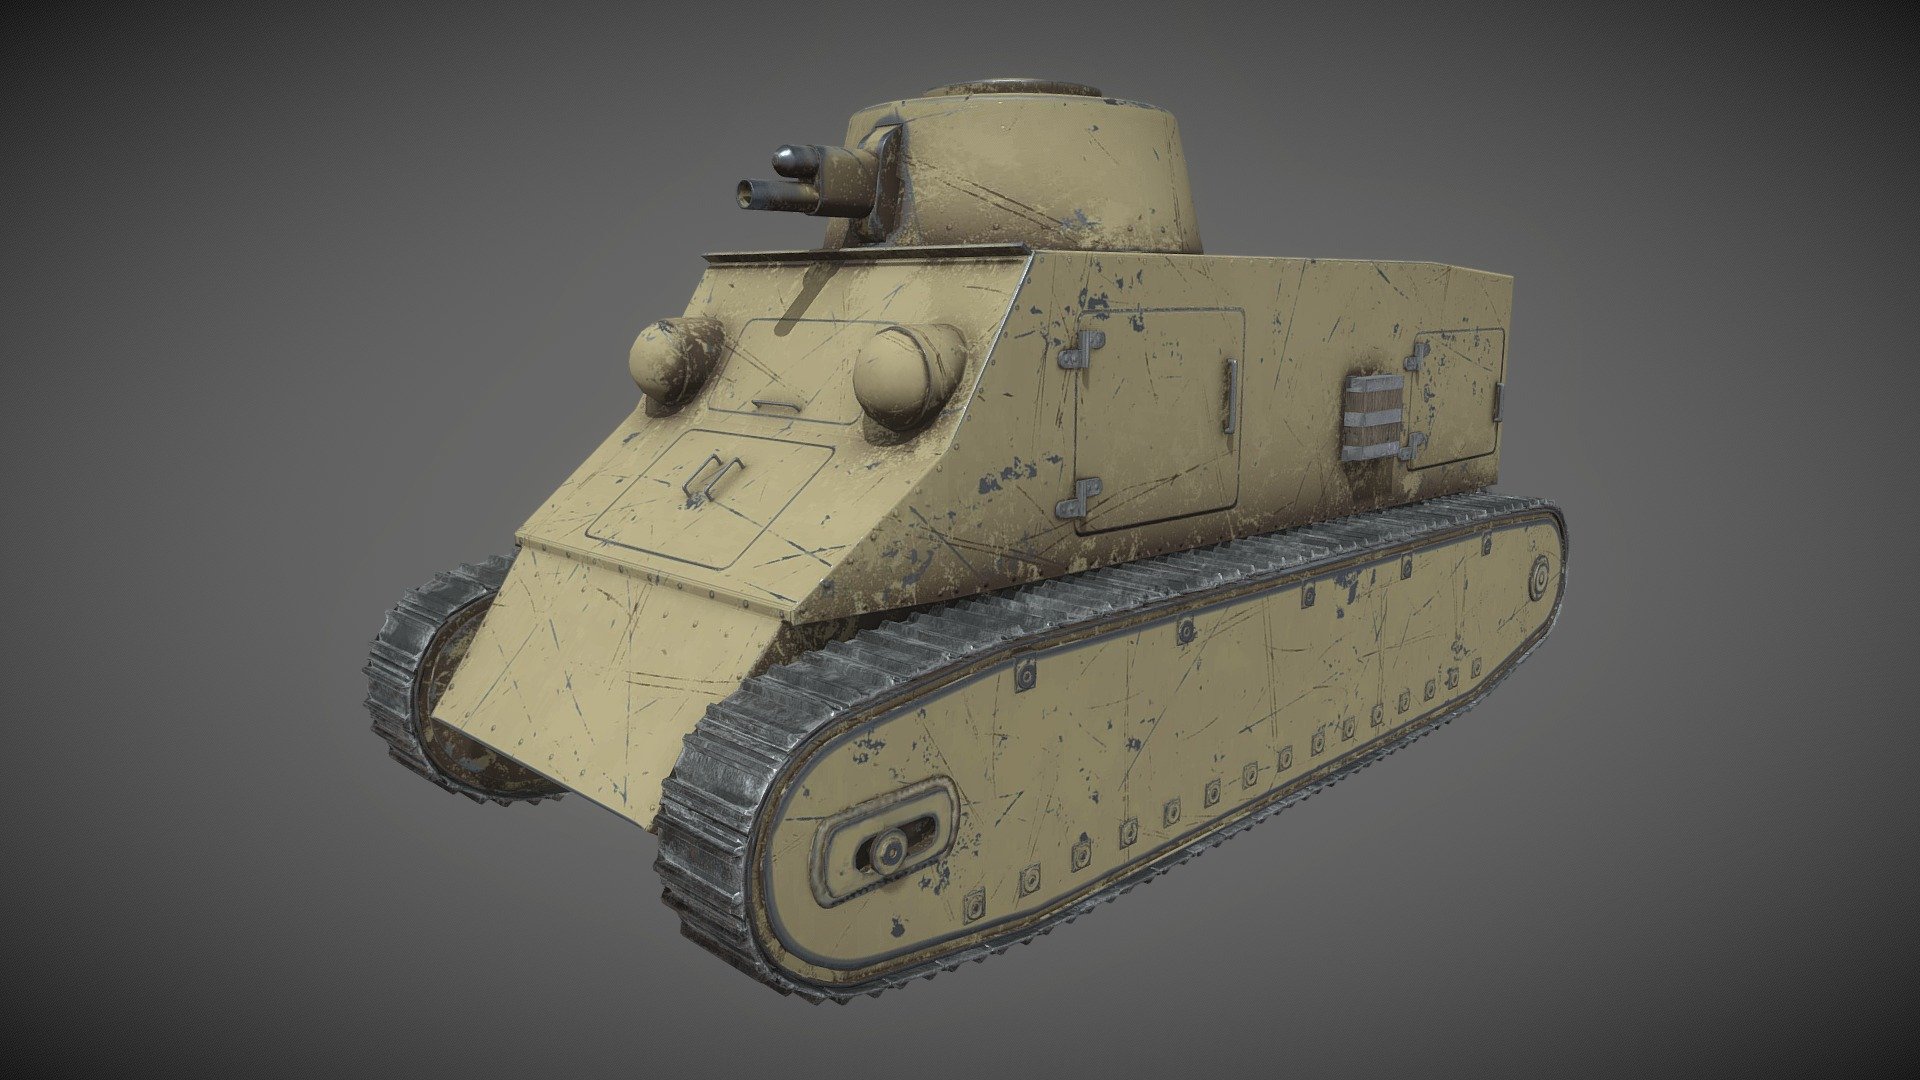 Kolohousenka - czechoslovakian light tank.
Modelled in Blender, textured and baked in Substance Painter.
Low poly game asset with 8K .JPG textures:


Diffuse
Metallic
Roughness
Normal
Ambient Occlusion
 - Kolohousenka - Czechoslovakian Light Tank - 3D model by julix00 3d model